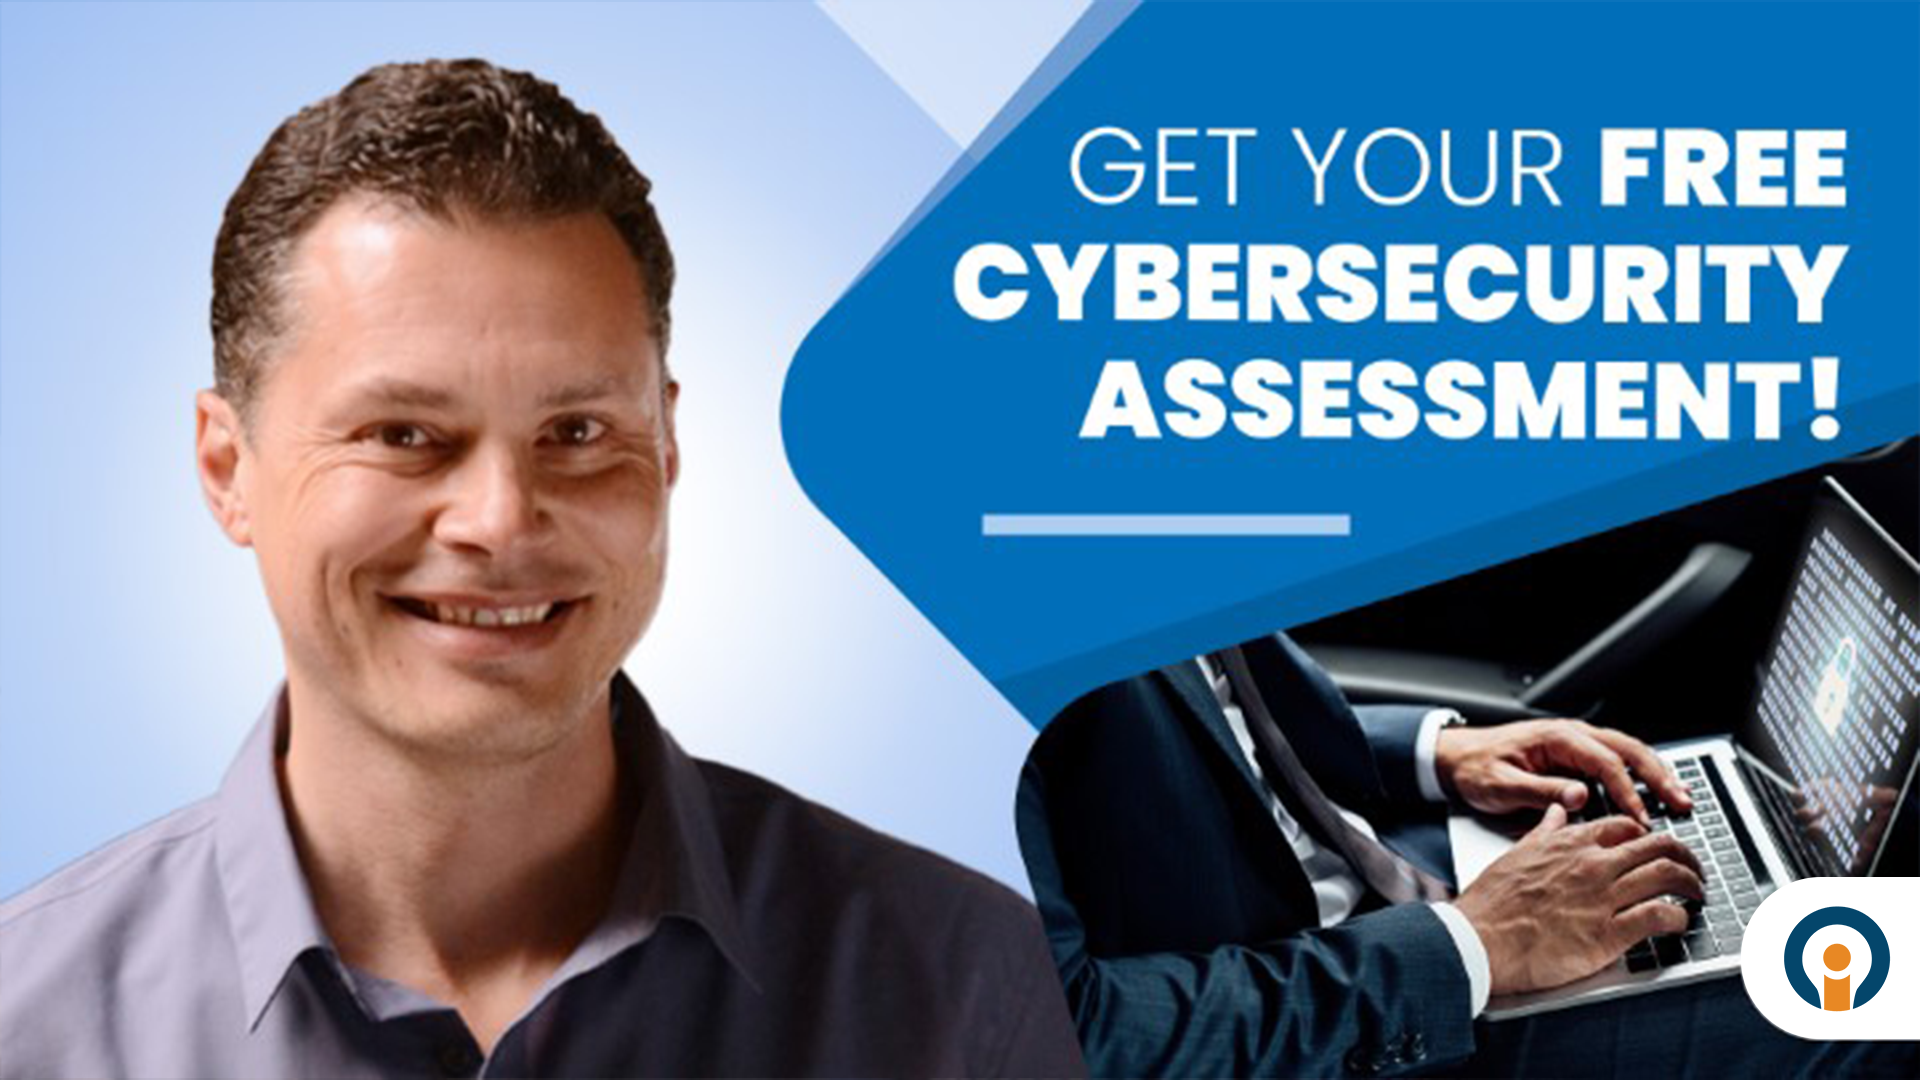 What is a Cybersecurity Assessment